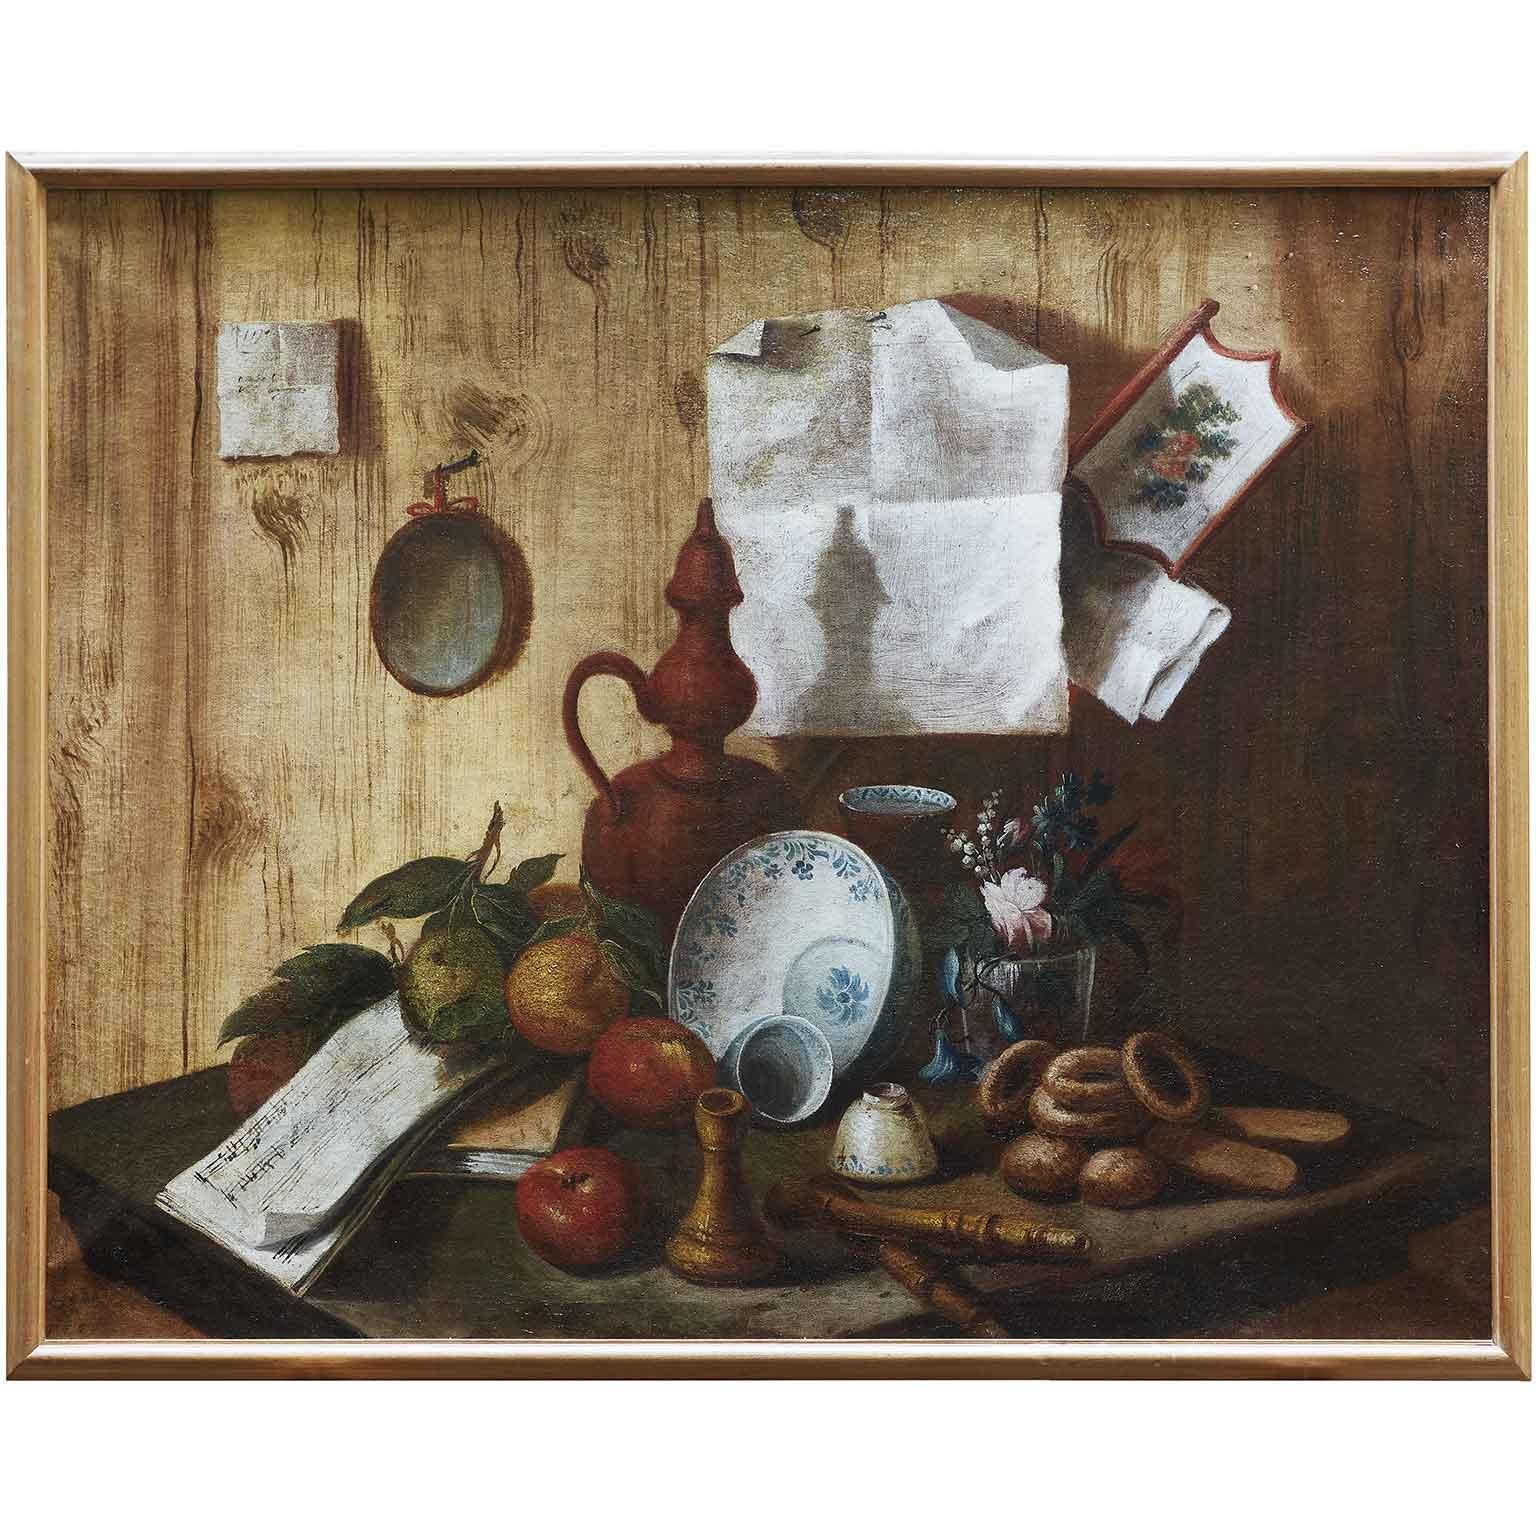 A stunning pair of antique Italian trompe l’oeil still life paintings, a pair of 18th century oil on canvas vision jokes, false still life paintings known as deception paintings by a follower of  Cristoforo Munari (Reggio Emilia 1667- Pisa 1720) of